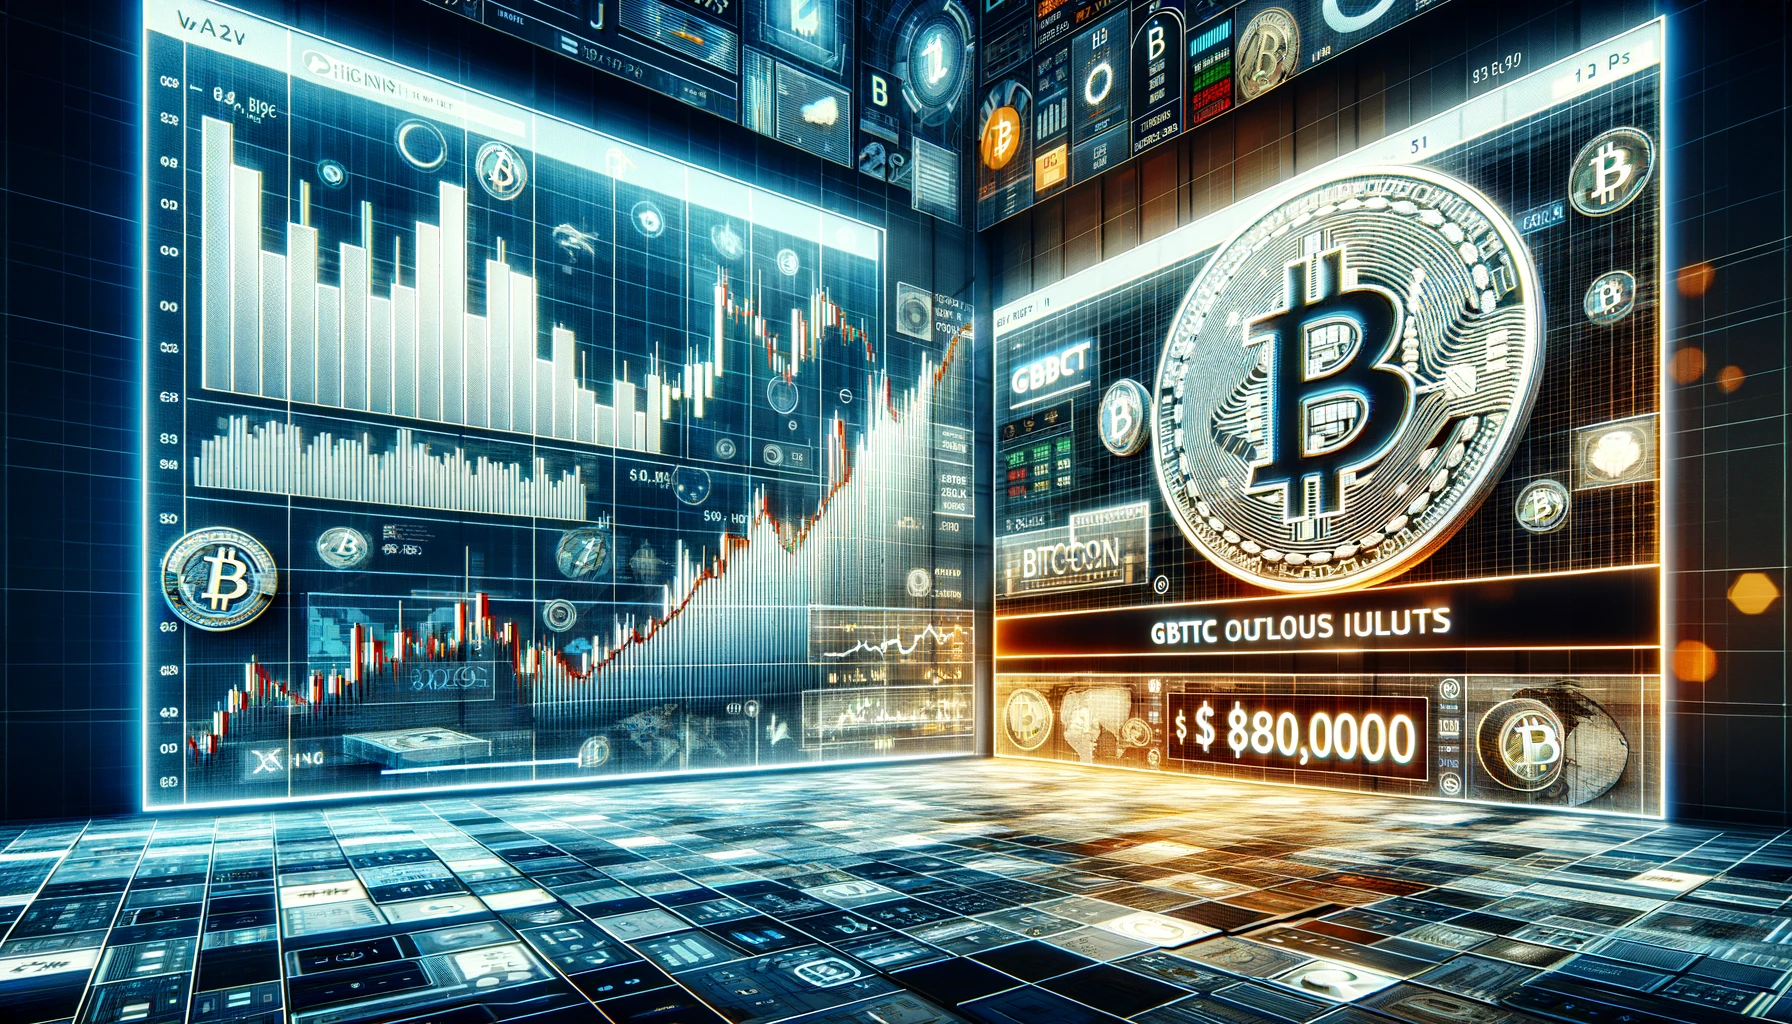 GBTC Outflows Hit One-Month Low: Is a Bitcoin Price Rally to $80,000 Imminent?